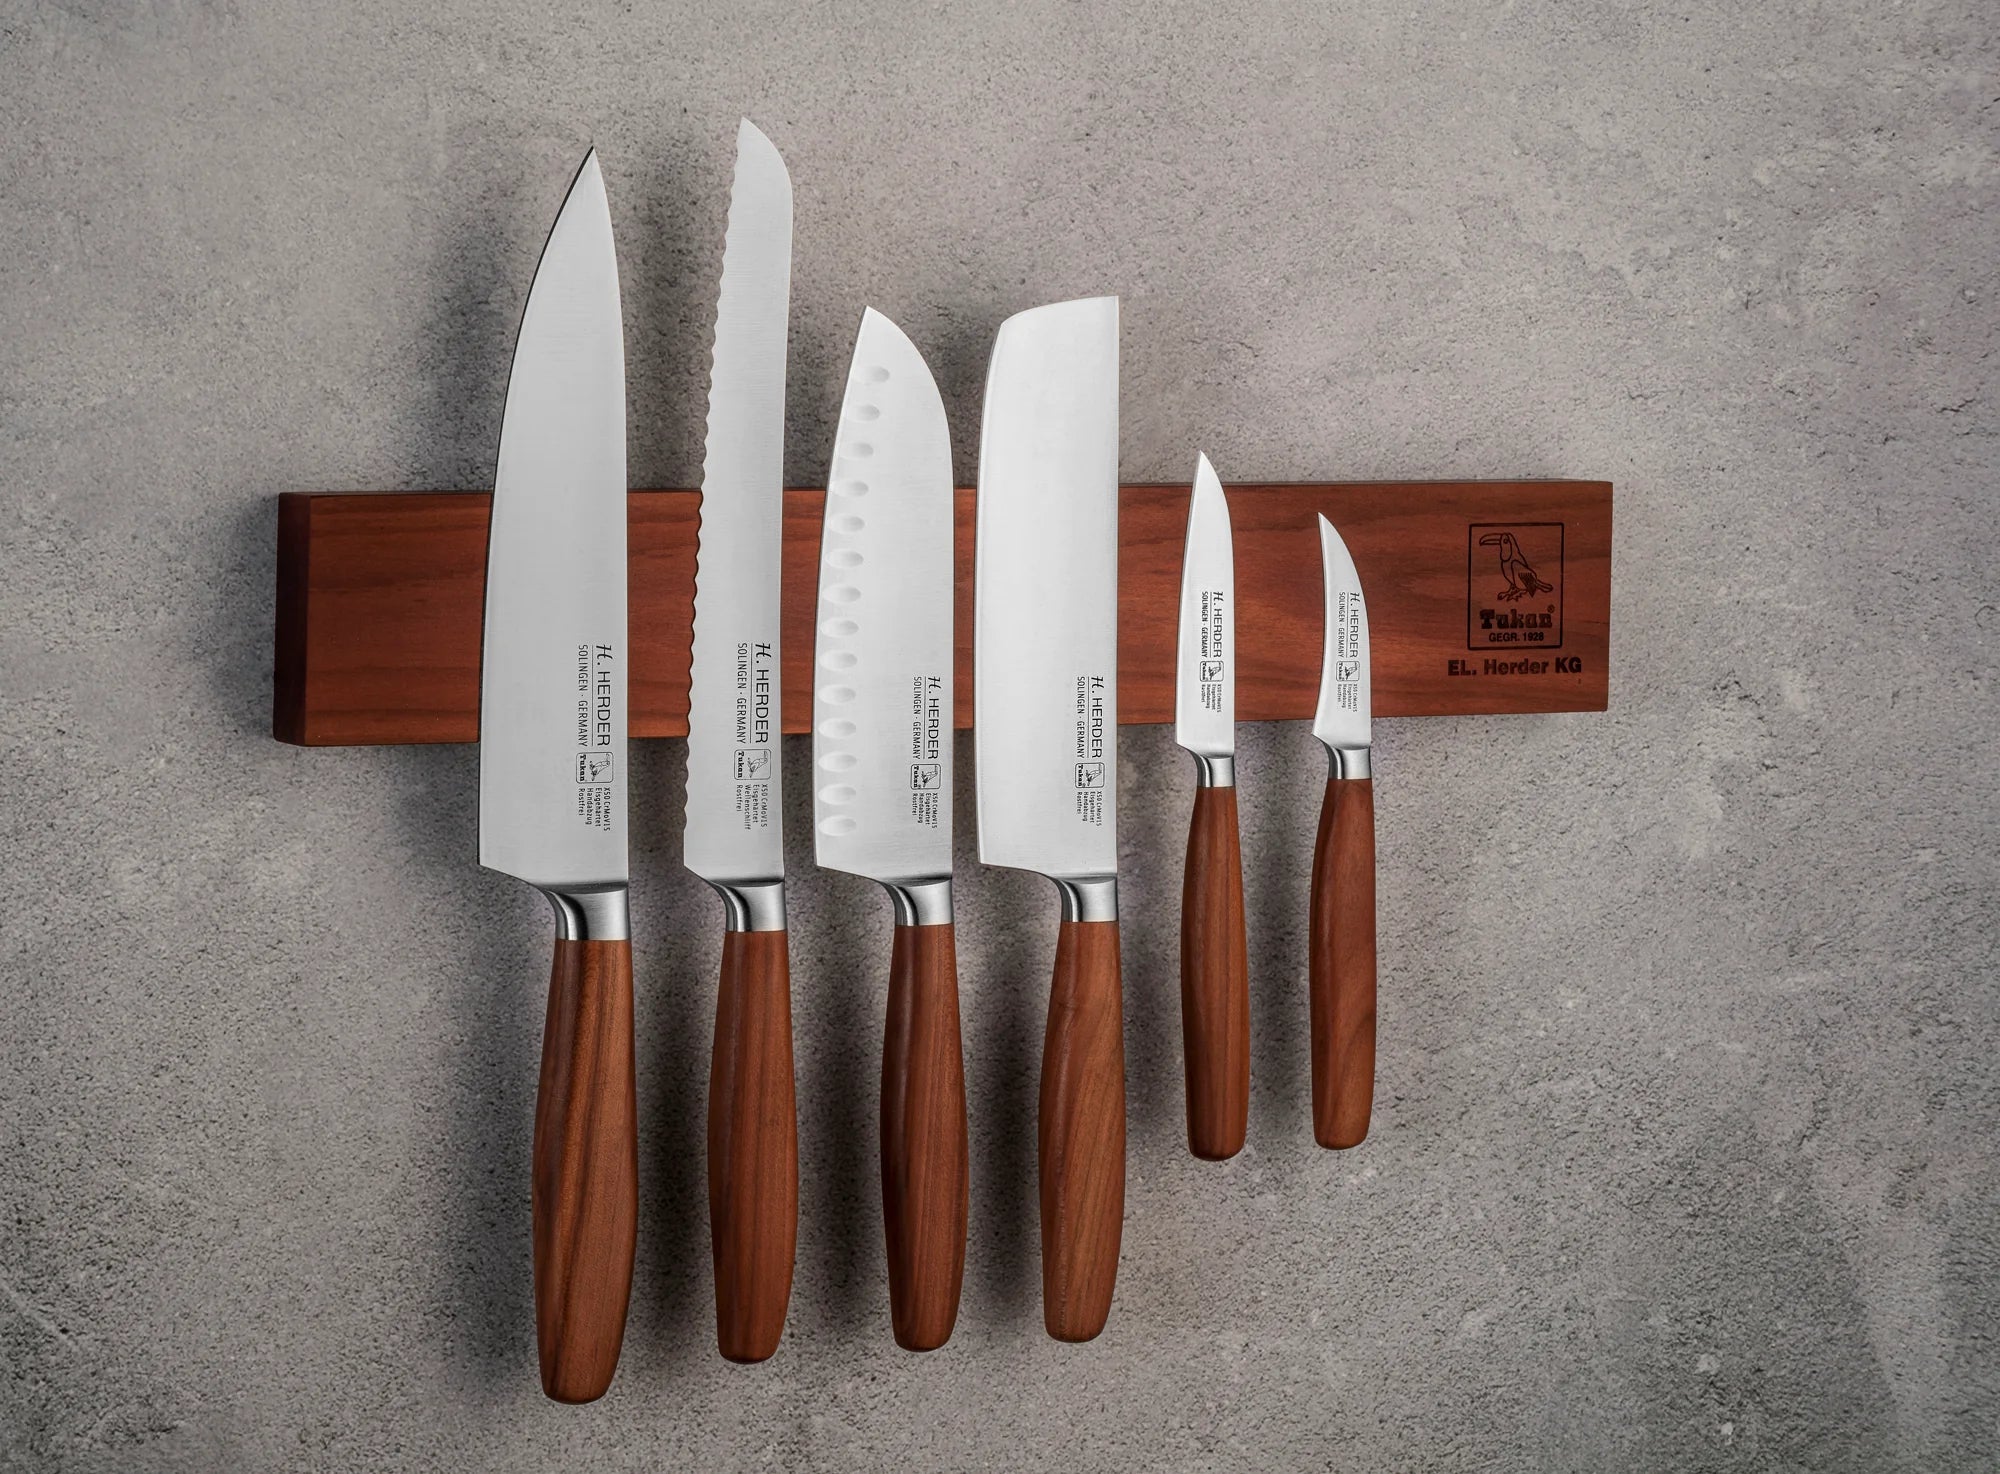 Knife set 7pcs Eterno, plum wood, forged, with magnetic bar